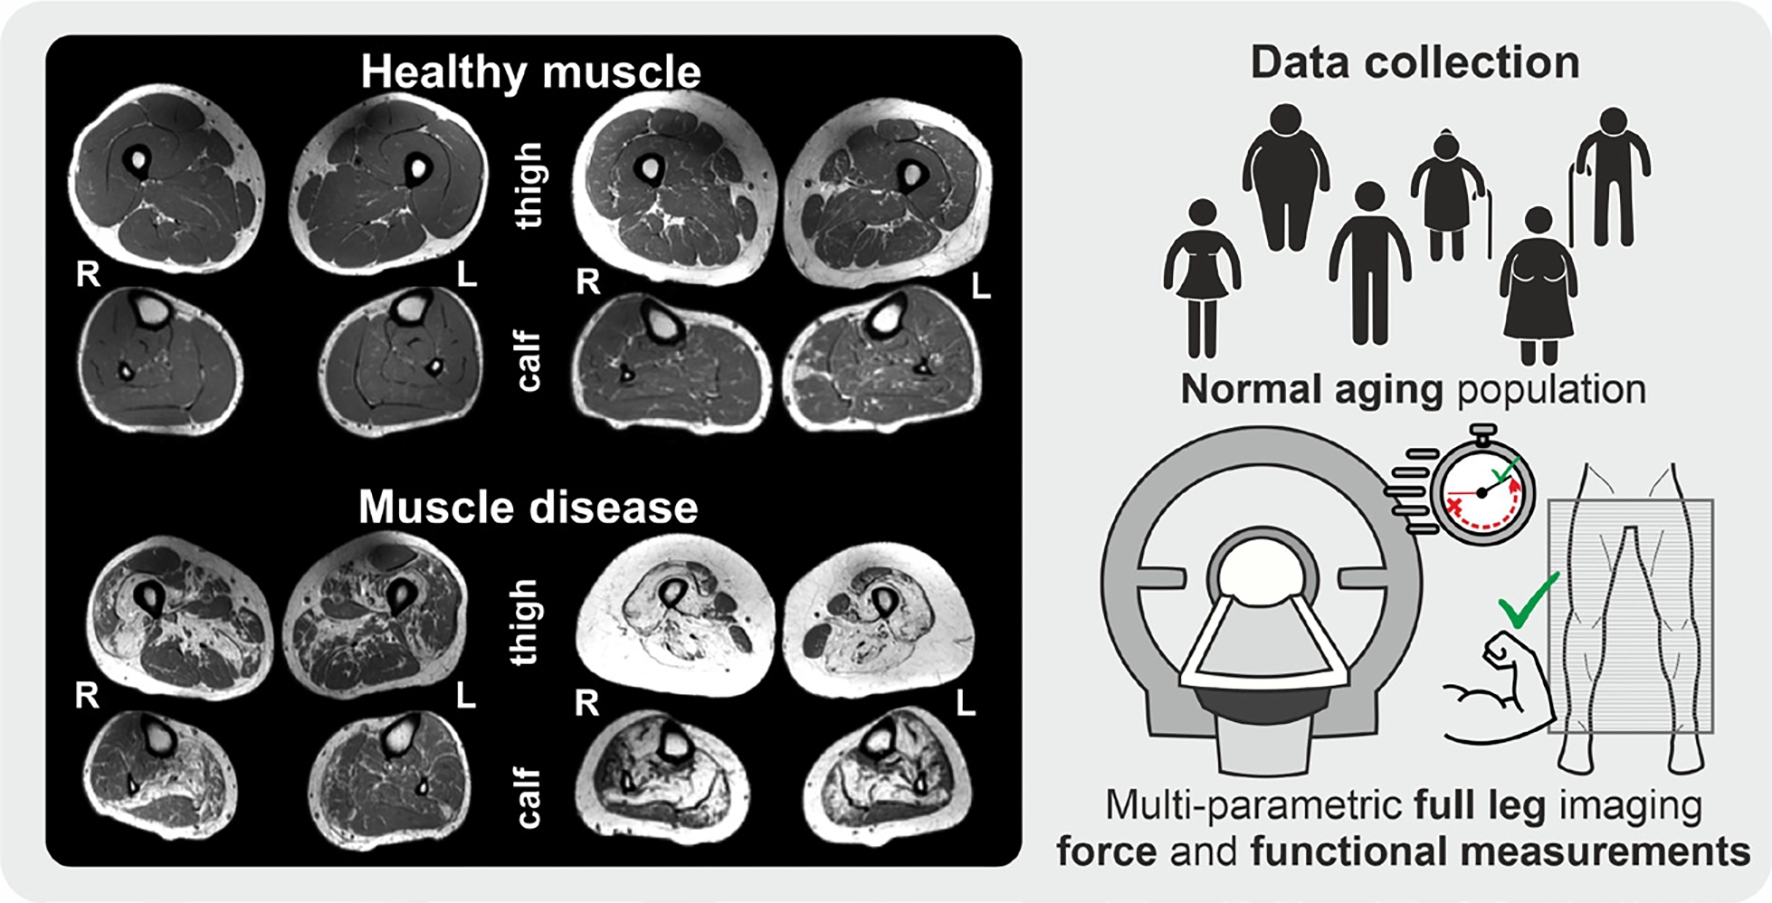 Population based acquisition of quantitative muscle MRI data in normal aging population